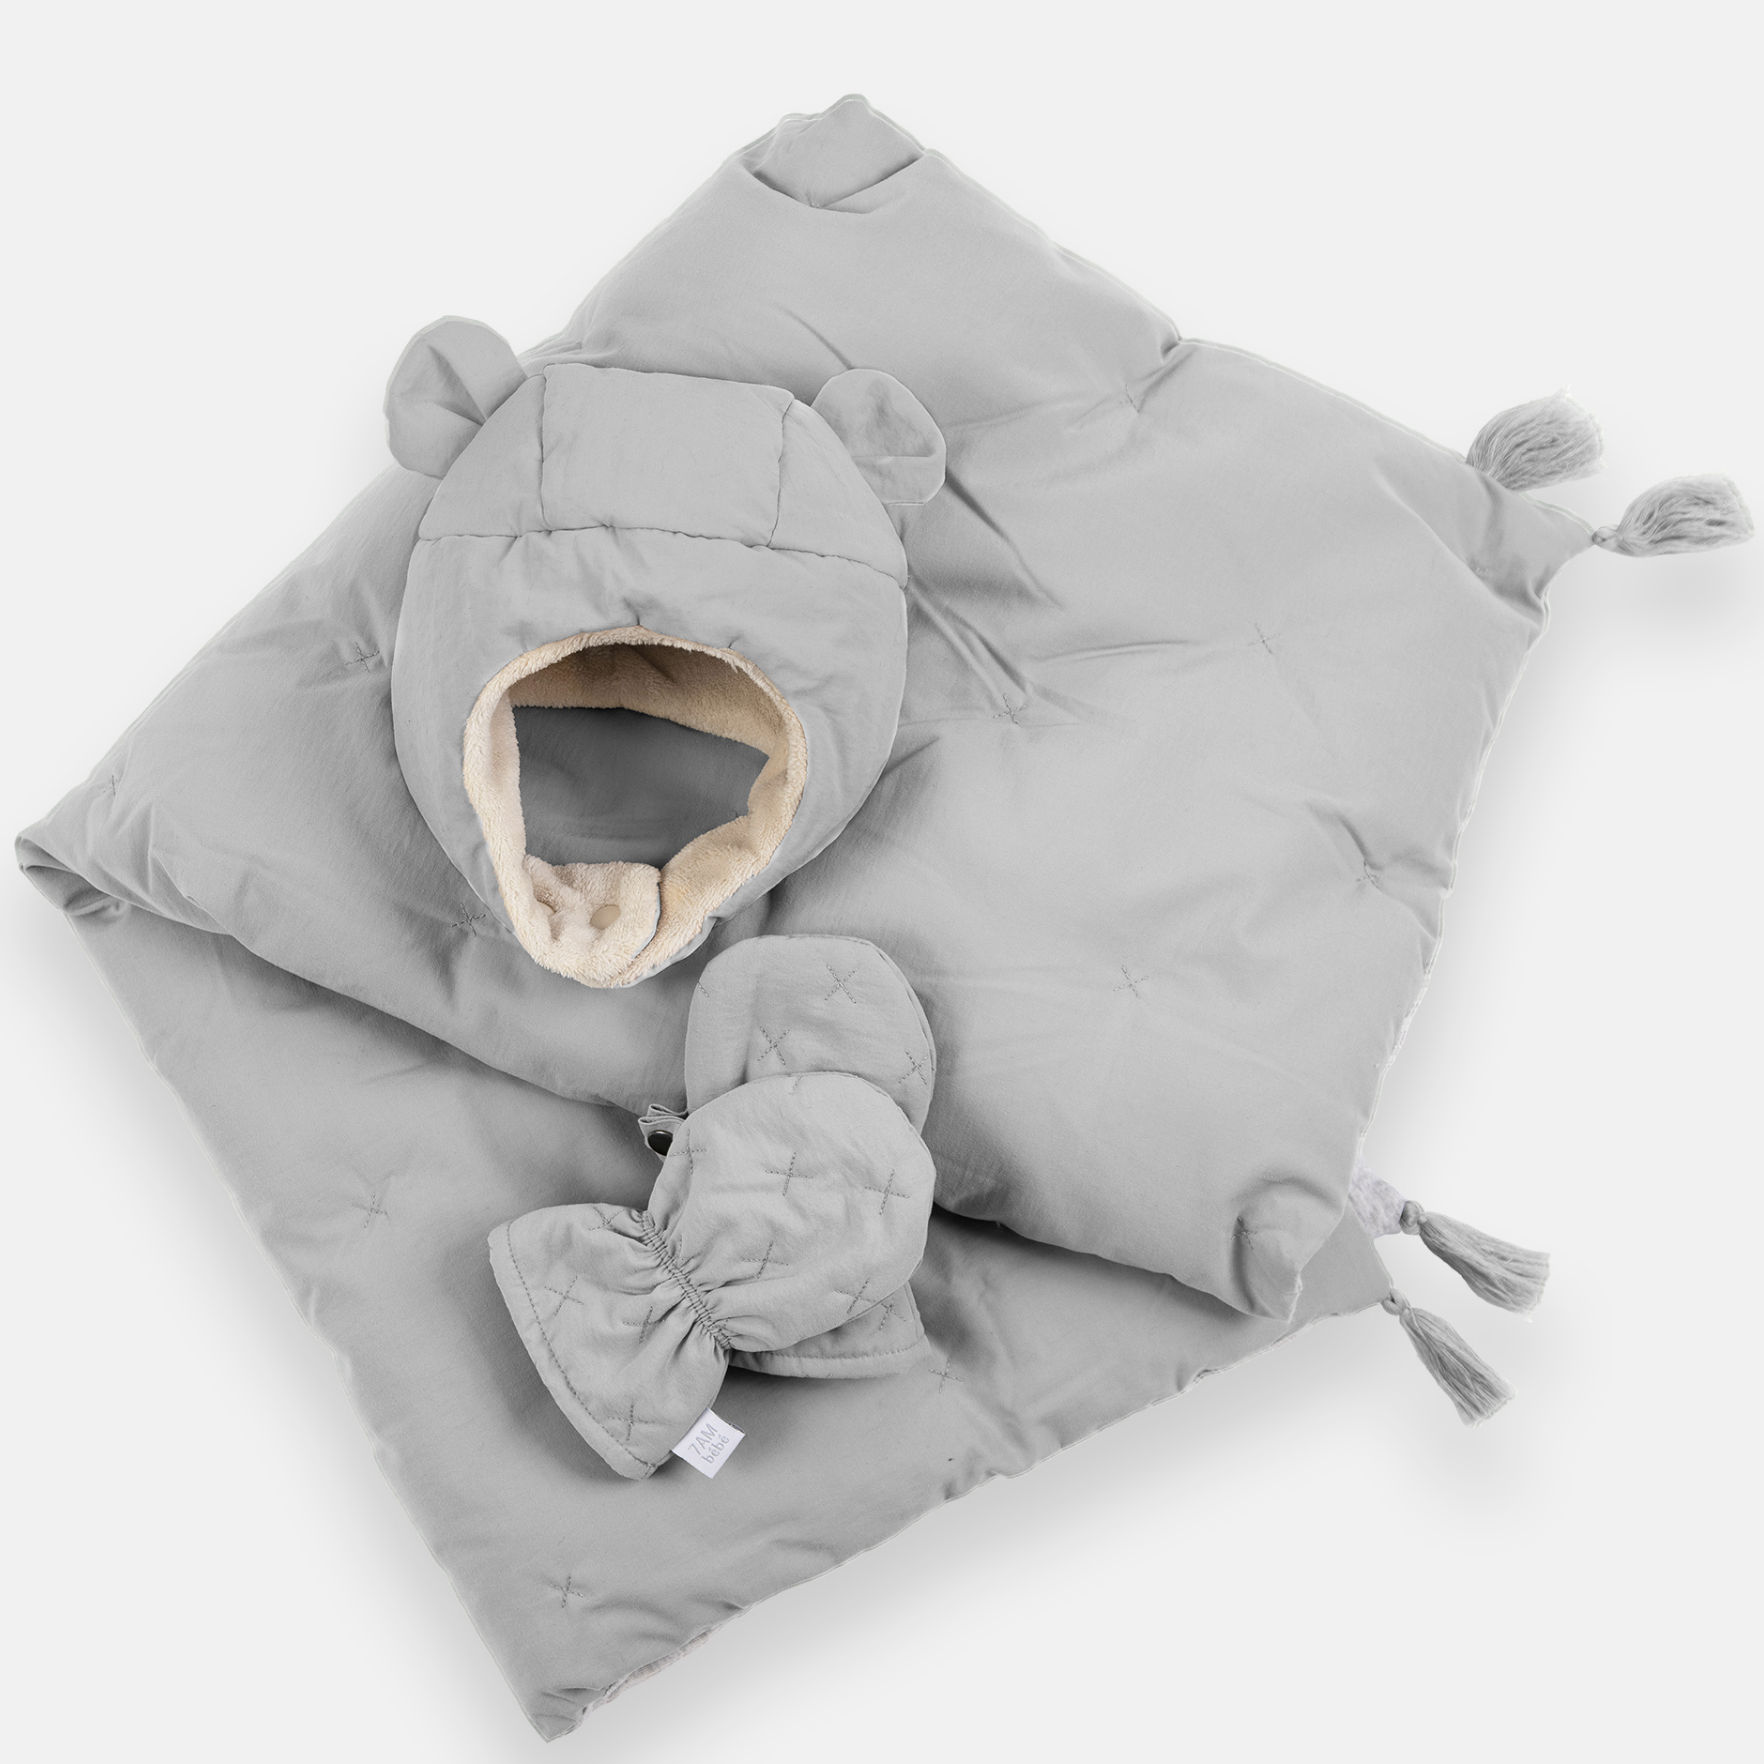 7AM Airy Baby Gift Set including stroller blanket, hat and mittens in pearl colour at Bonjour Baby Baskets